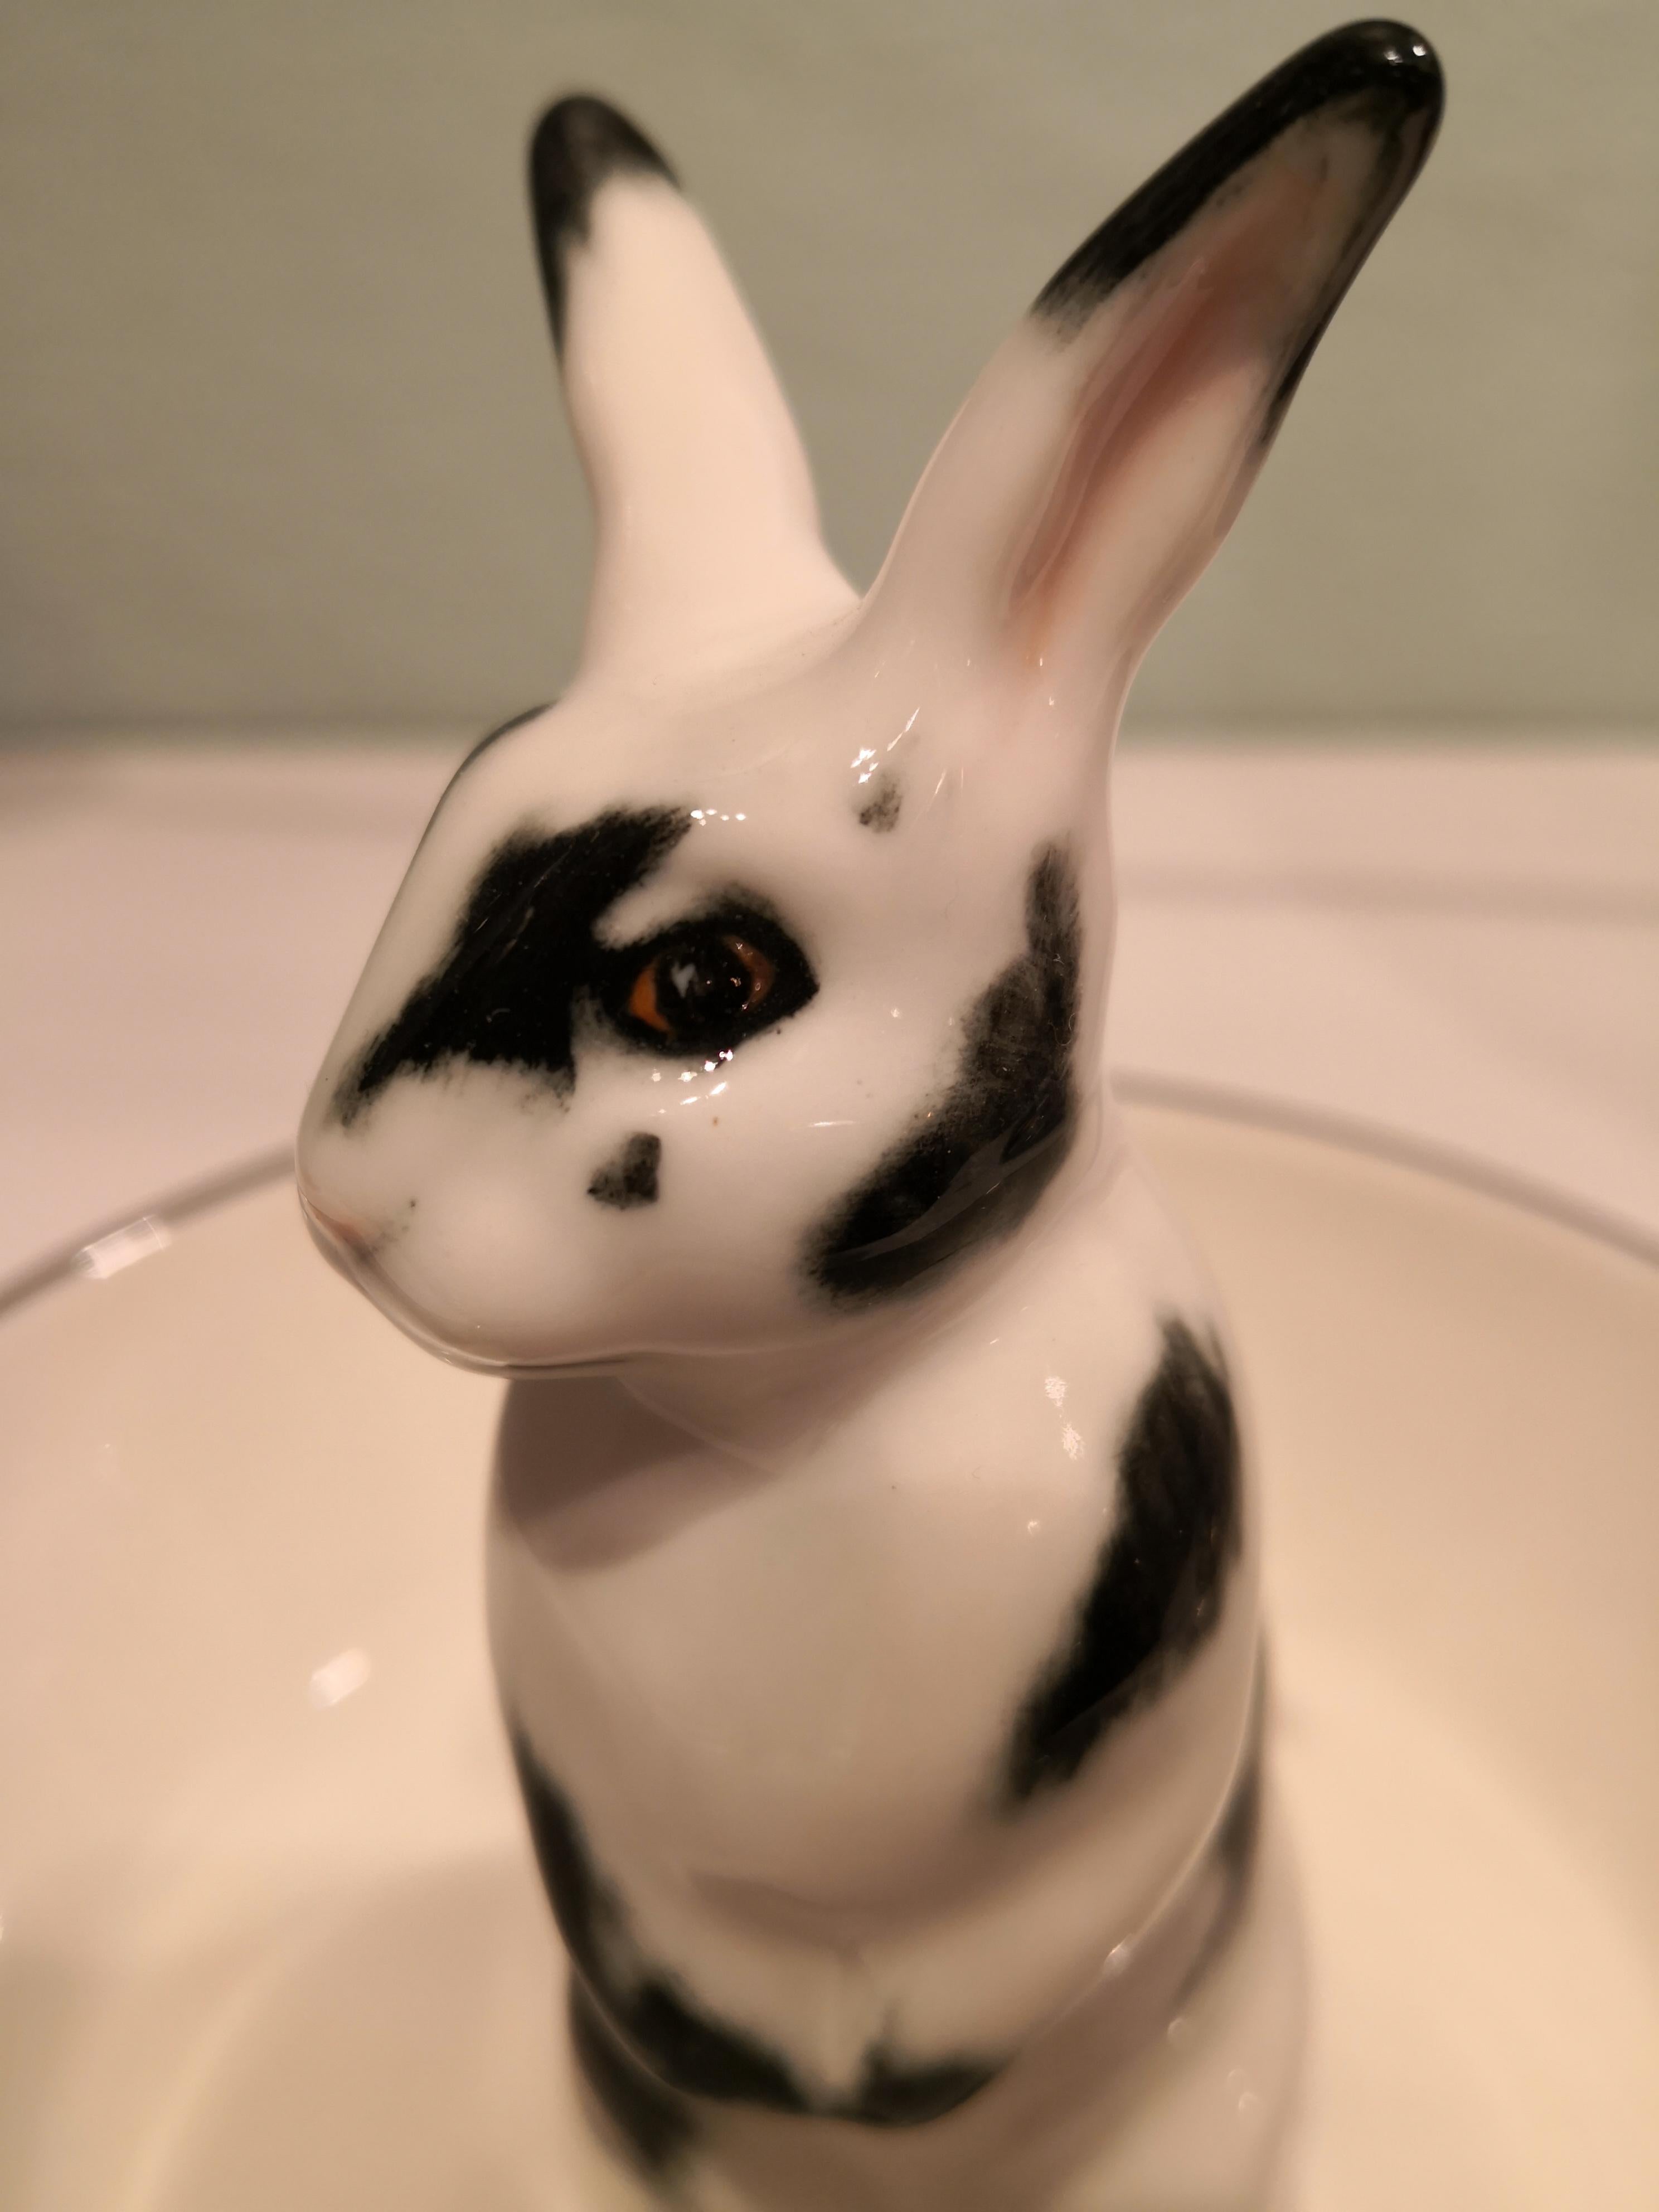 Completely handmade porcelain bowl with a hands-free naturalistic painted Easter rabbit in black and white colors. The rabbit is sitting in the middle of the bowl for decorating nuts or sweets around the figure. Rimmed with a fine platinum line.